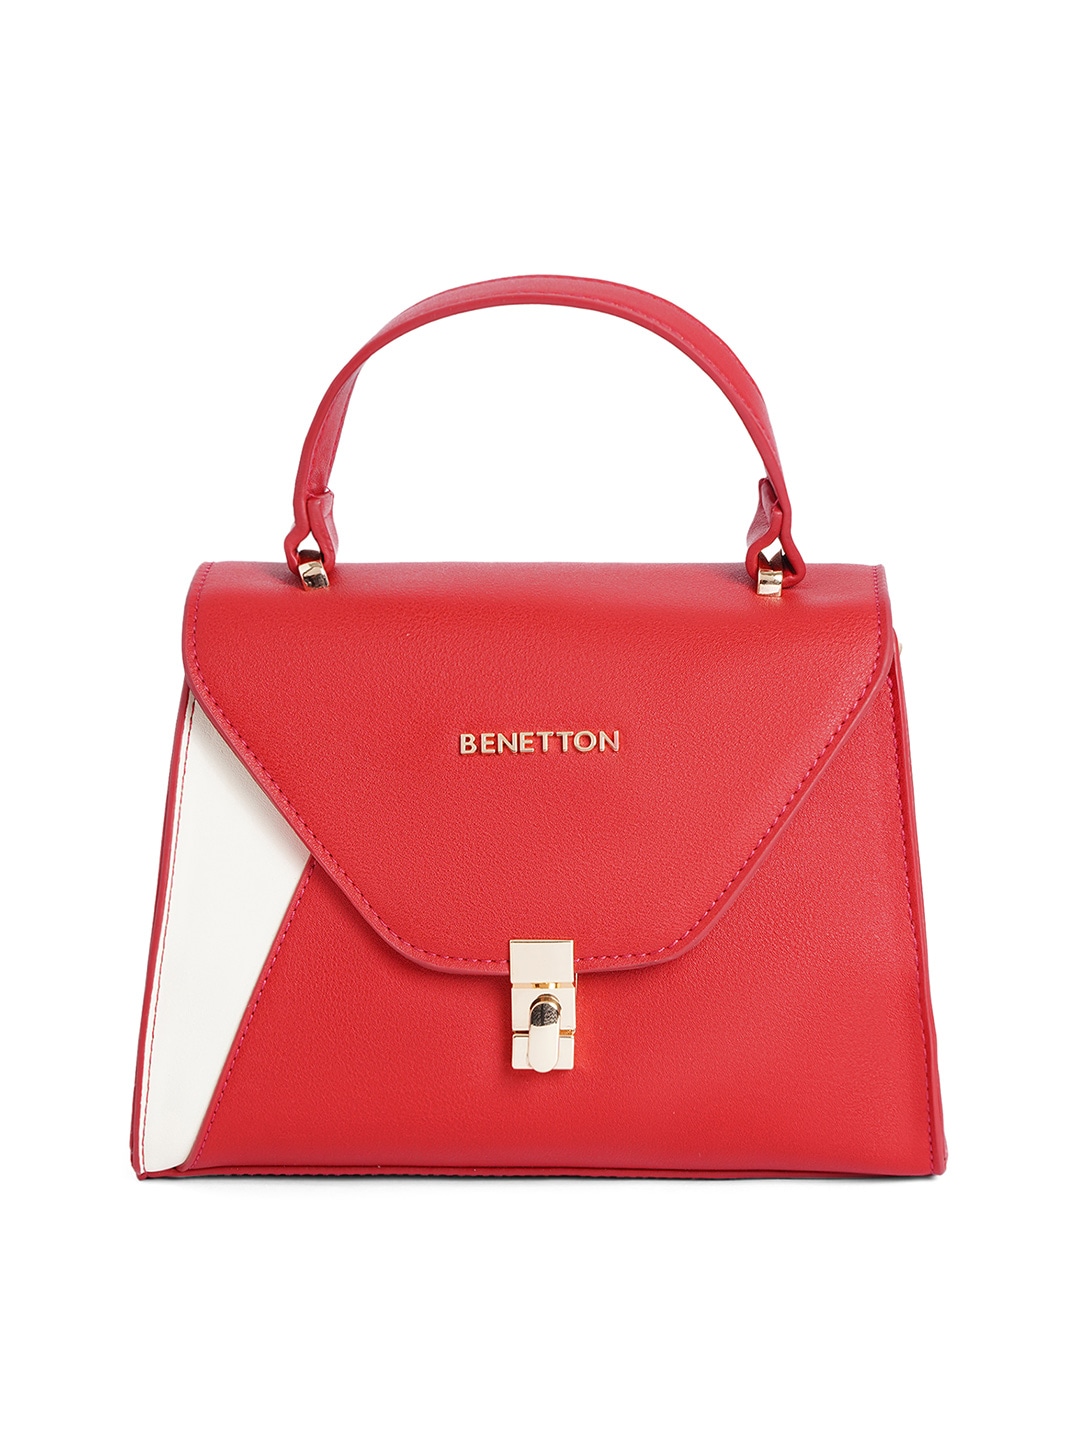 United Colors of Benetton Red & White Colourblocked Satchel Price in India